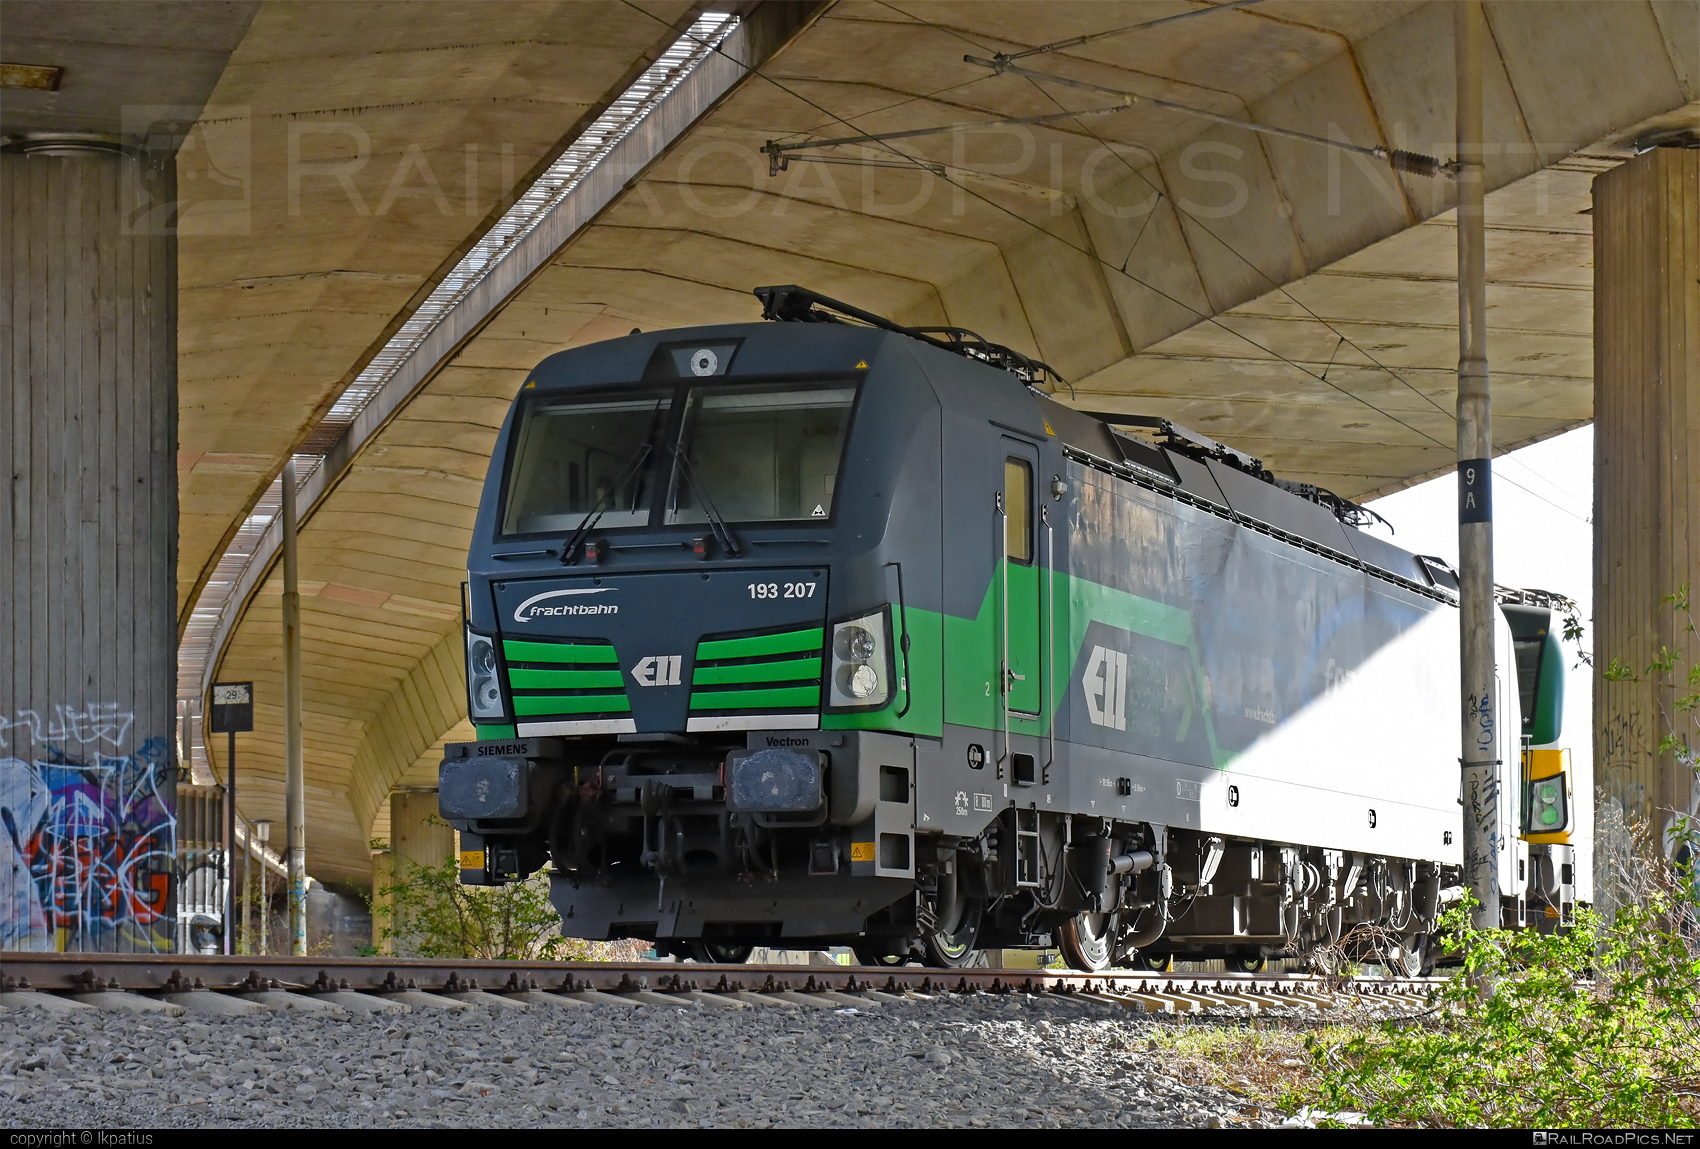 Siemens Vectron MS - 193 207 operated by FRACHTbahn Traktion GmbH #ell #ellgermany #eloc #europeanlocomotiveleasing #frachtbahn #frachtbahntraktion #frachtbahntraktiongmbh #siemens #siemensVectron #siemensVectronMS #vectron #vectronMS